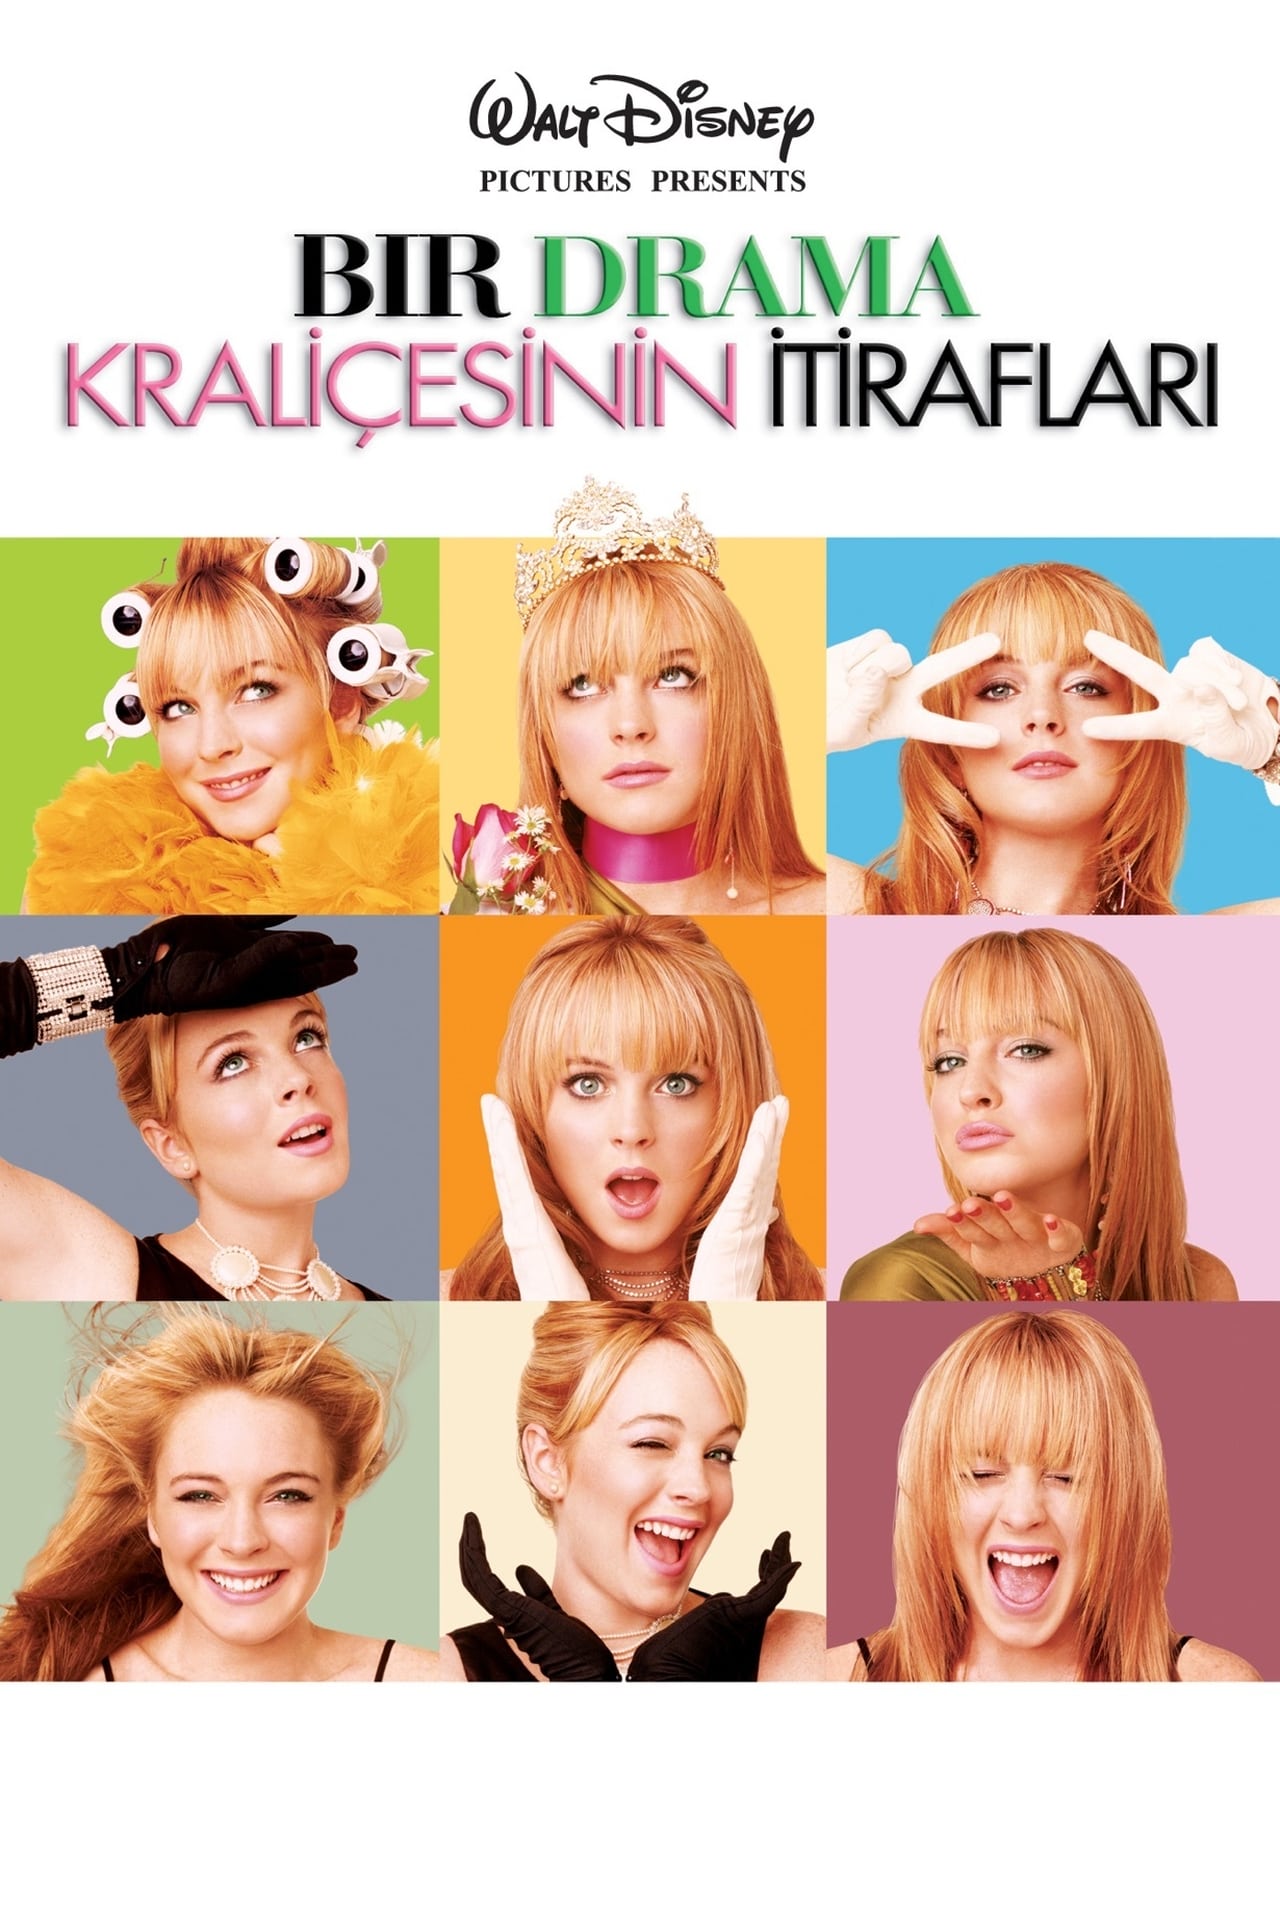 Confessions of a Teenage Drama Queen (2004) 640Kbps 23.976Fps 48Khz 5.1Ch DD+ NF E-AC3 Turkish Audio TAC